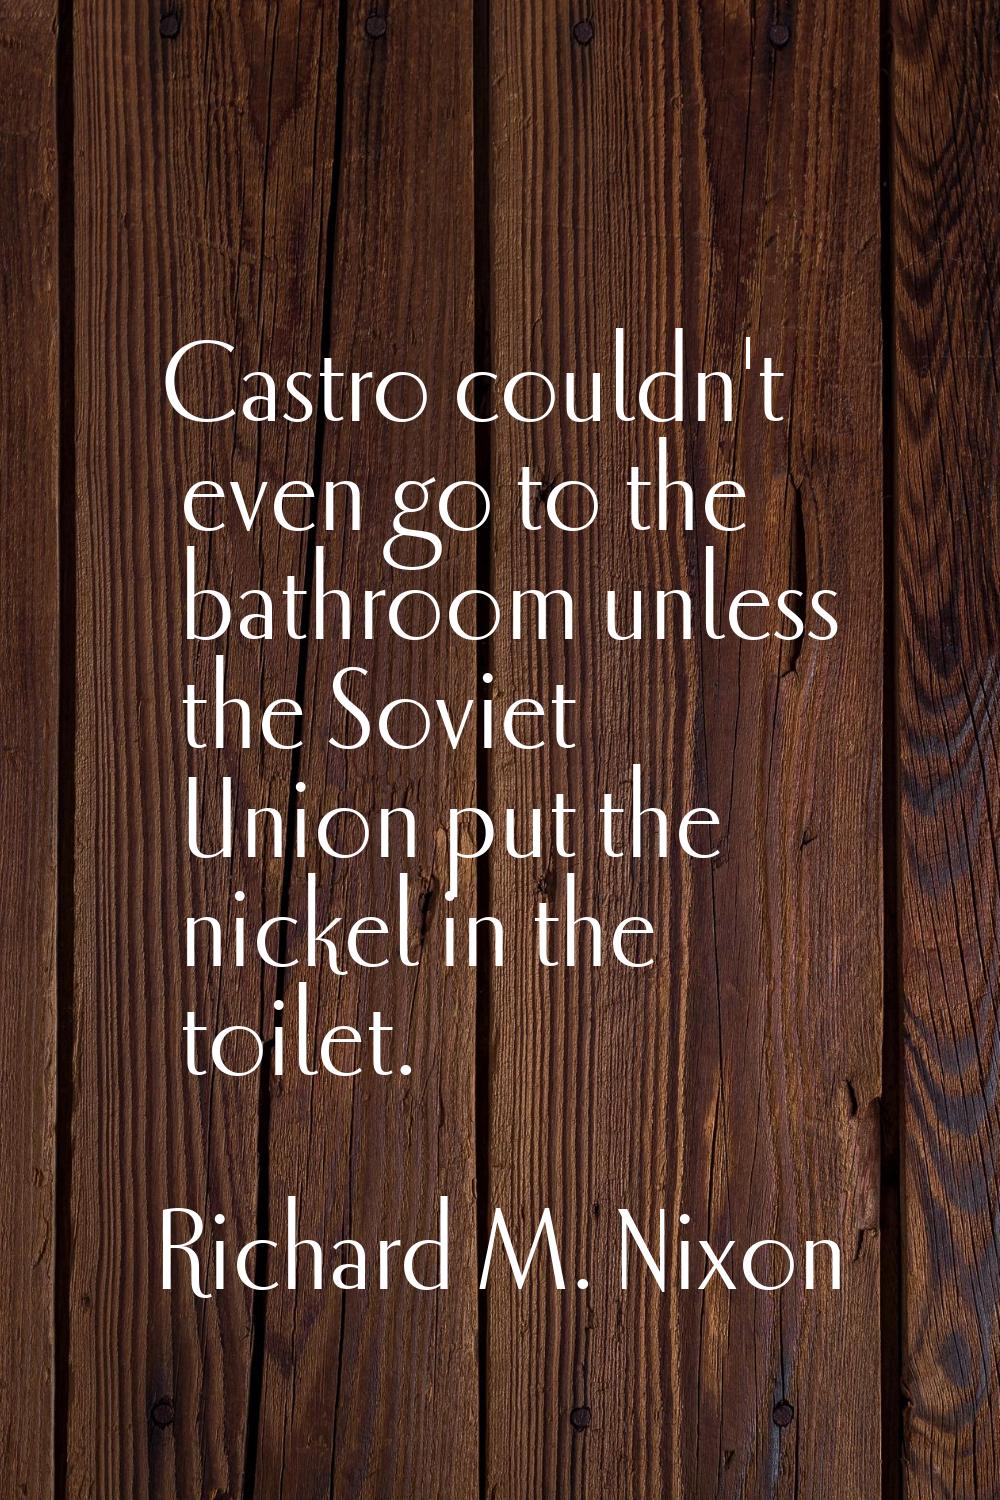 Castro couldn't even go to the bathroom unless the Soviet Union put the nickel in the toilet.